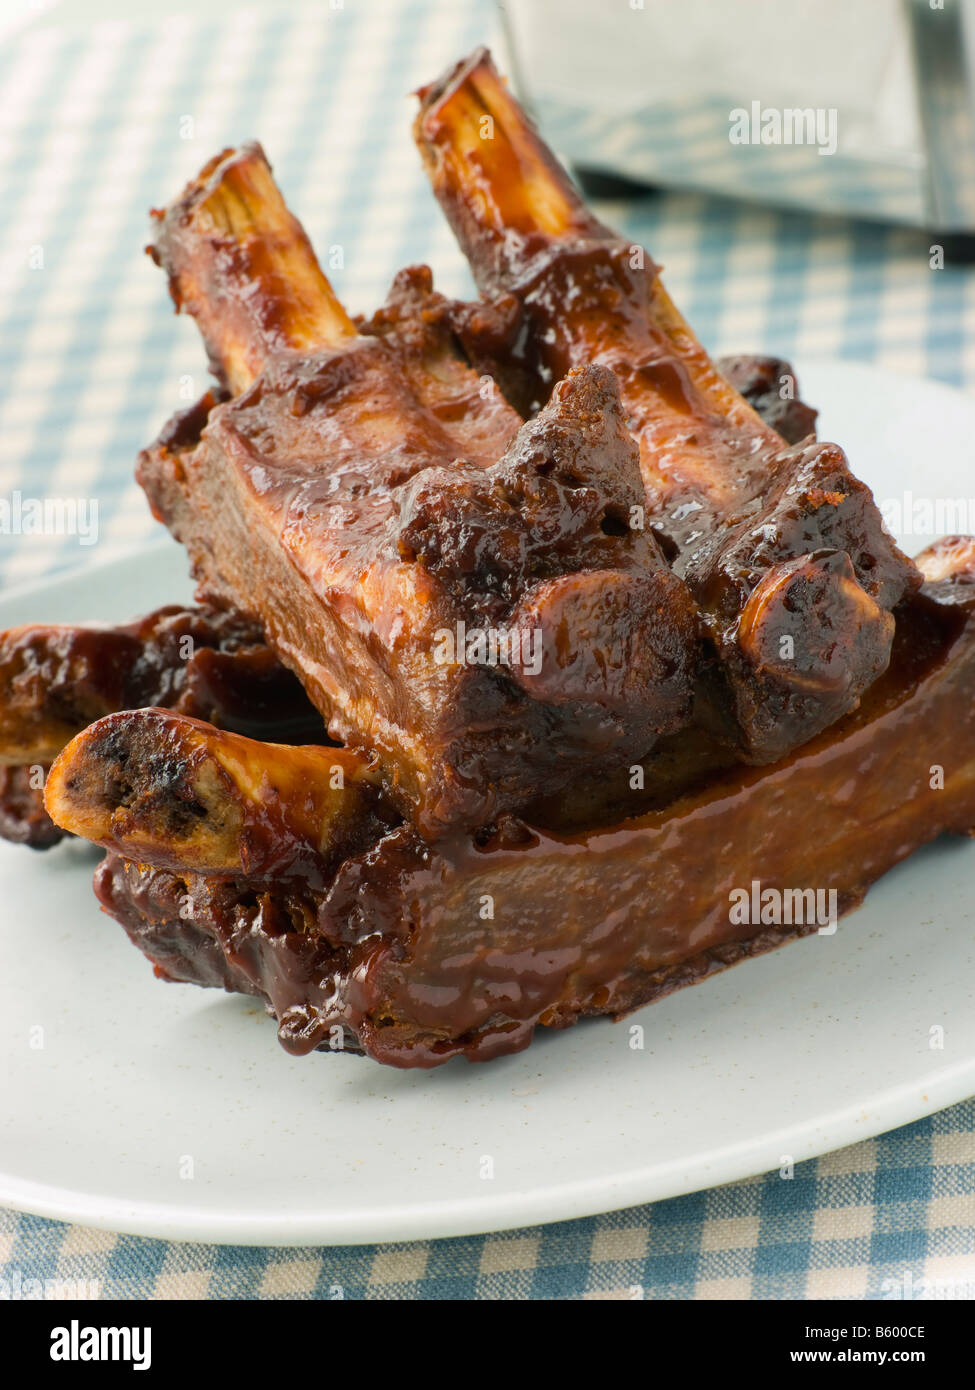 Stack of Barbeque Glazed Pork Ribs Stock Photo